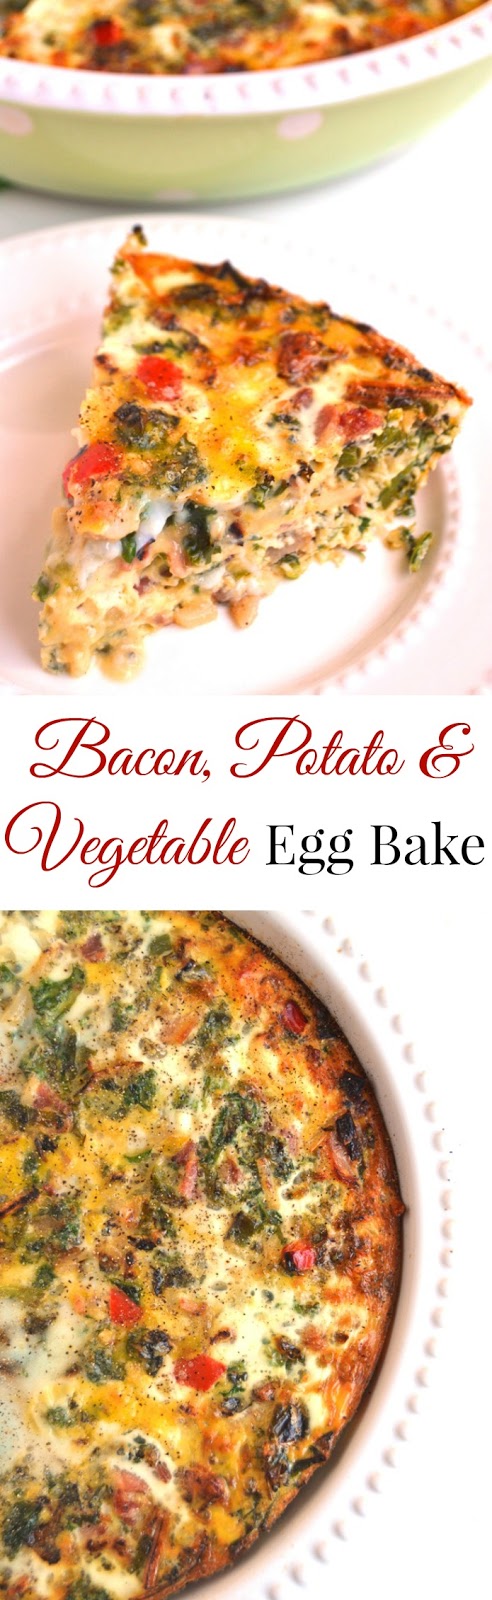 Bacon, Potato and Vegetable Egg Bake is simple to make and is full of flavor for a delicious and satisfying breakfast or brunch that your whole family will love! www.nutritionistreviews.com